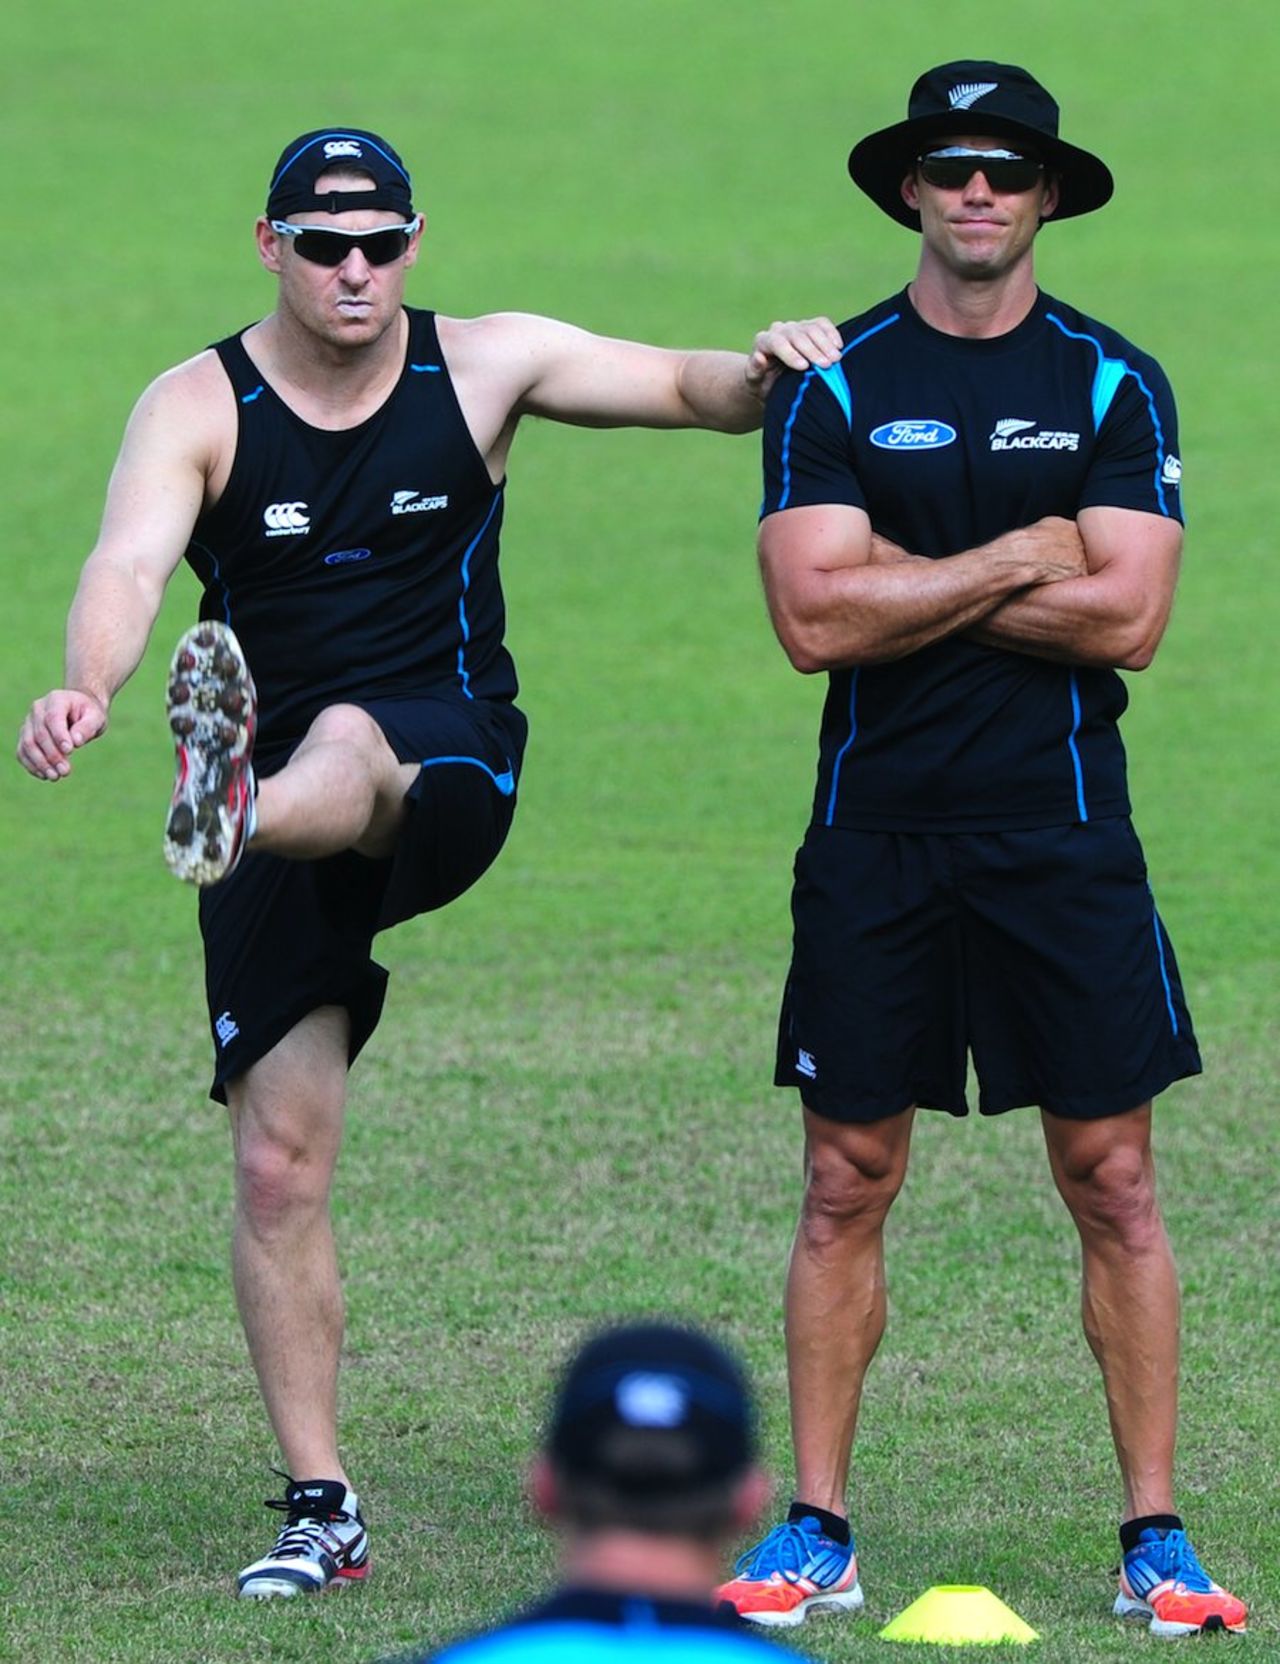 Nathan McCullum stretches during a training session ahead of the ODI series in Bangladesh, Mirpur, October 28, 2013